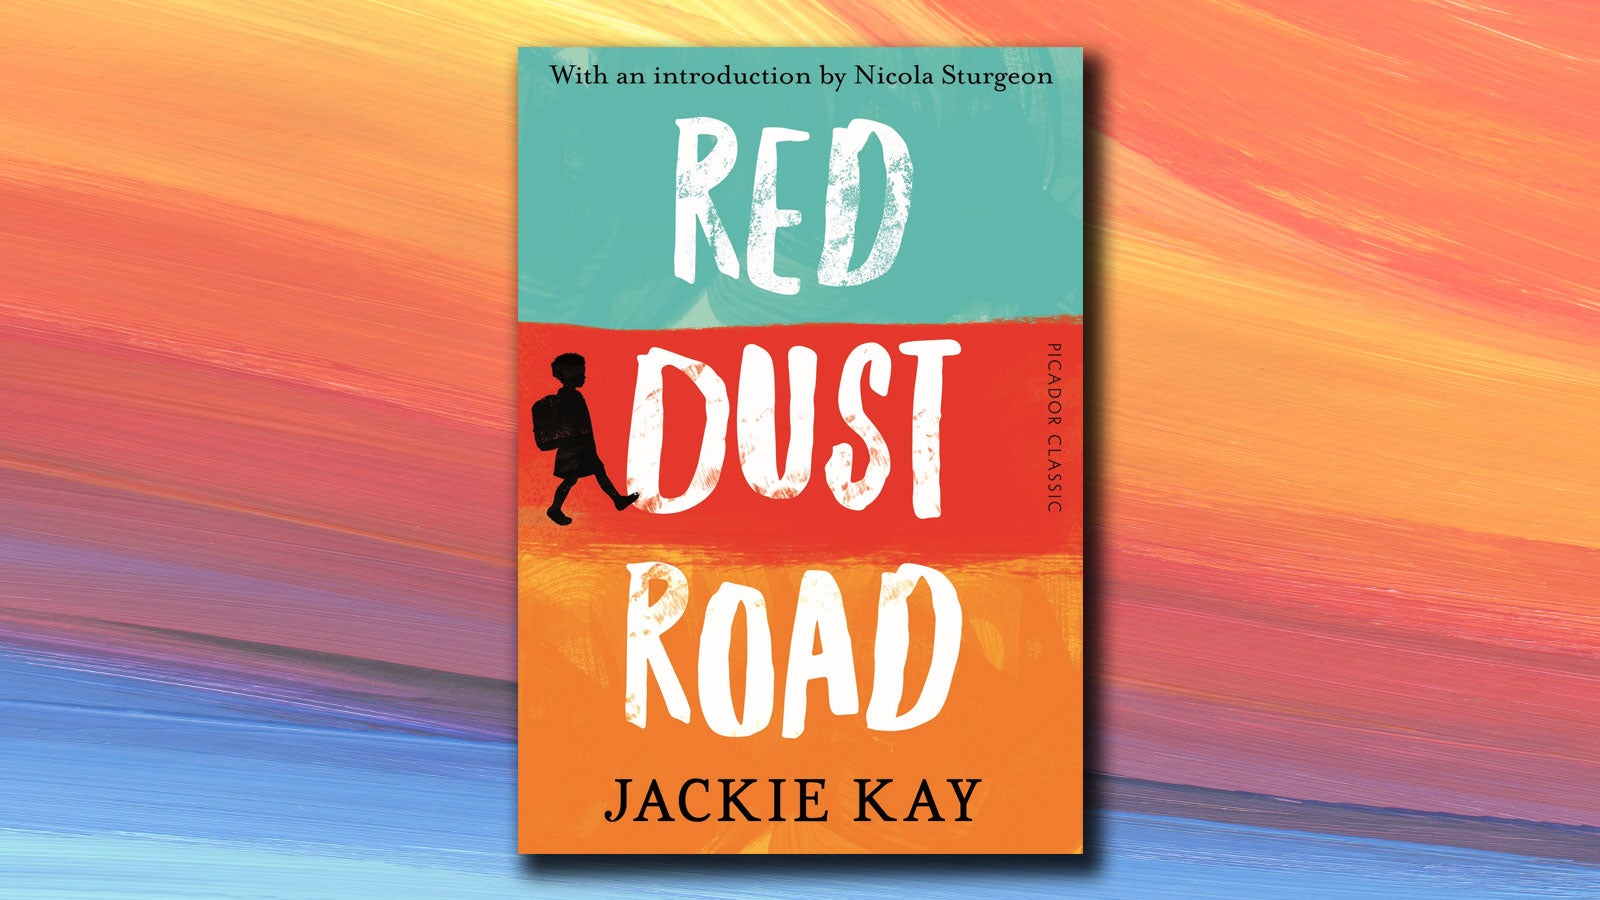 red dust road